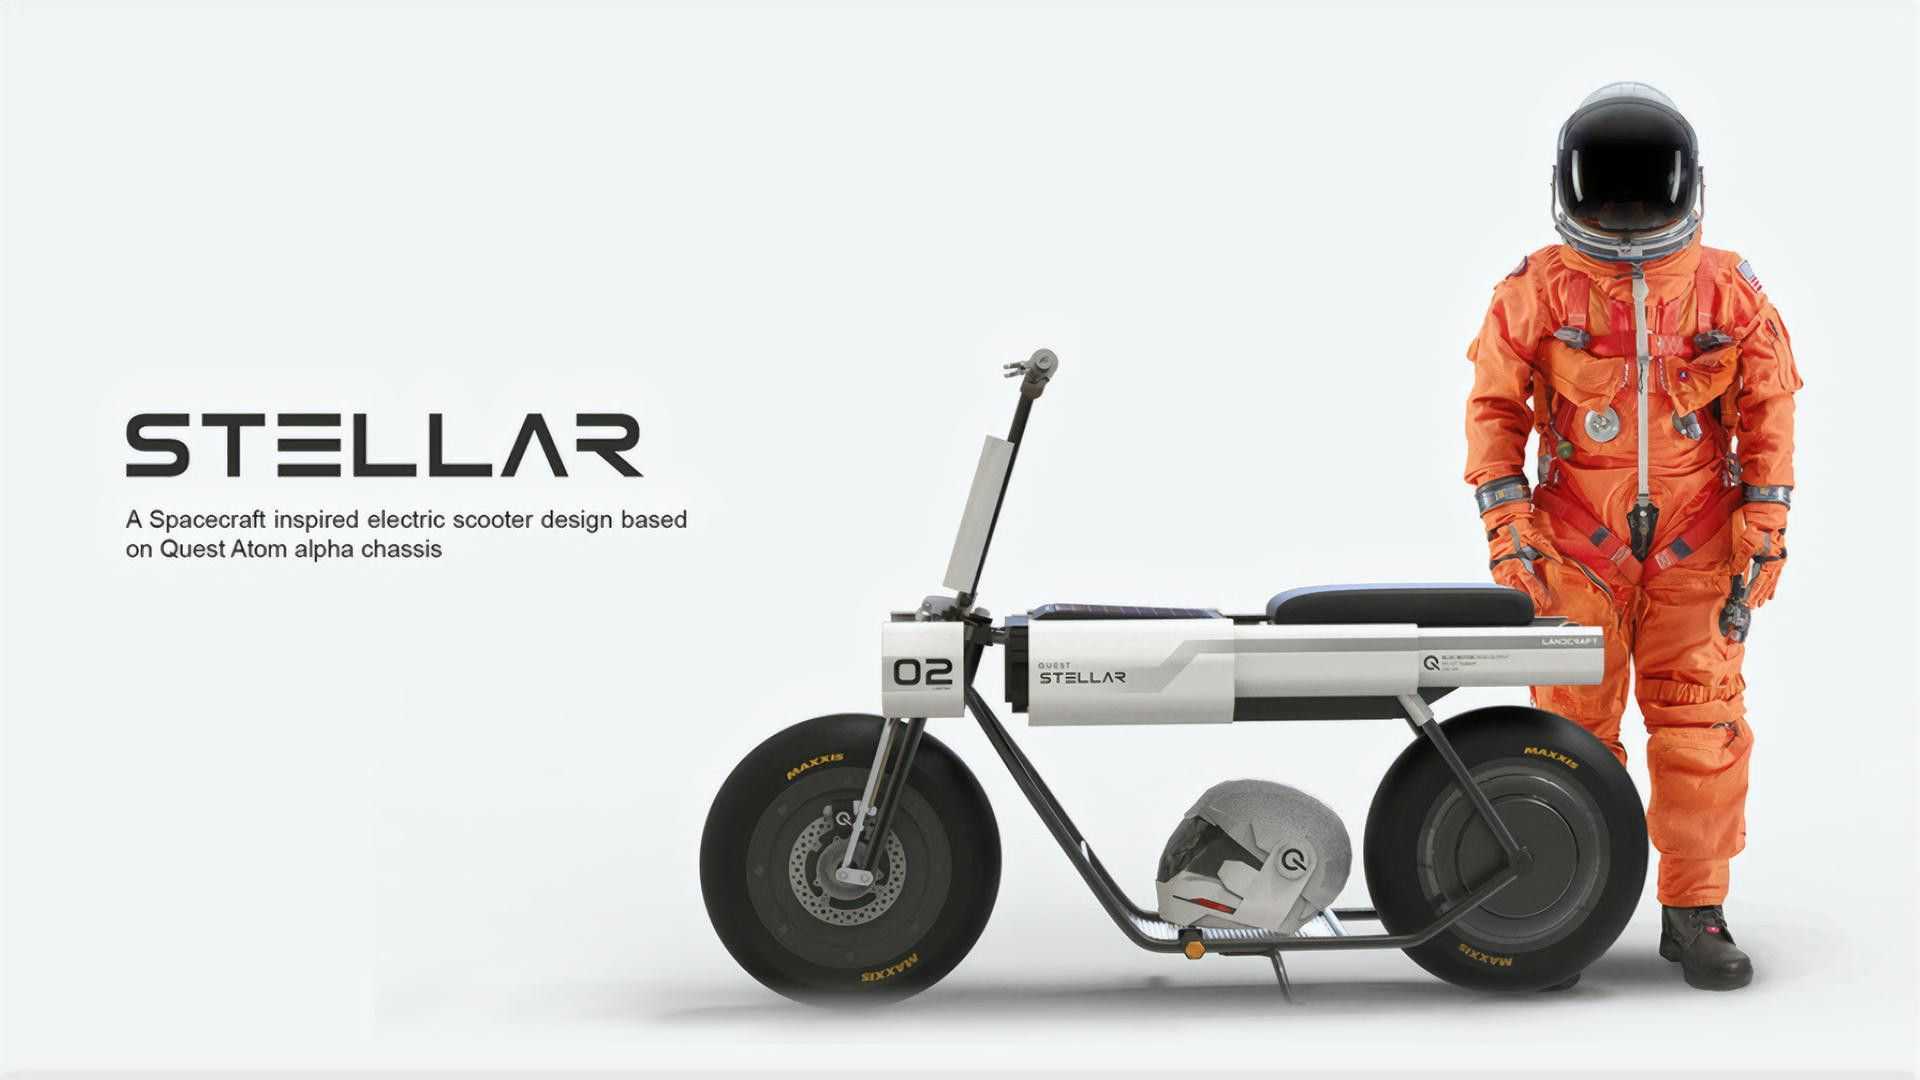 the electric scooter coming from space